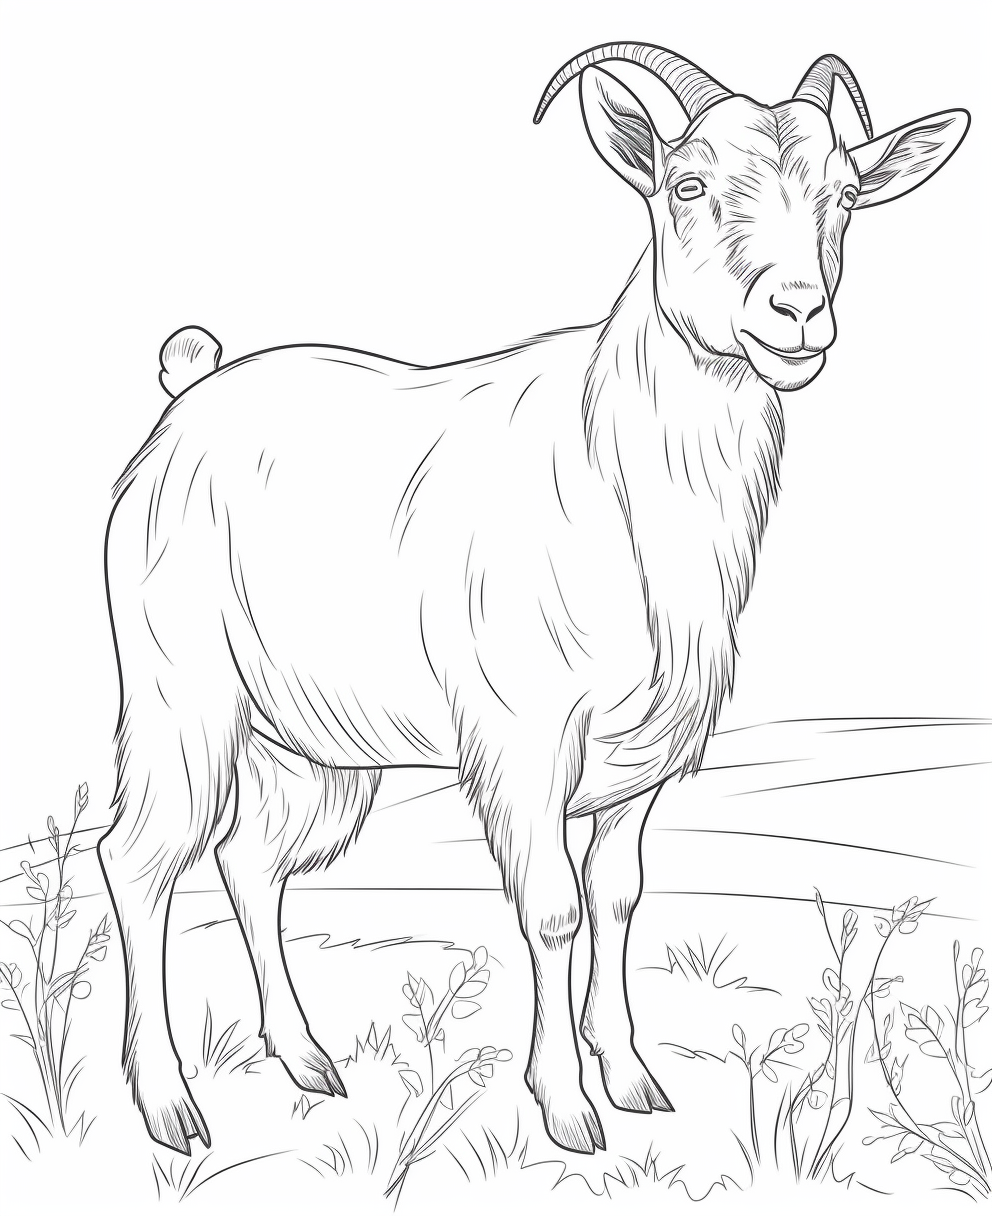 Goat coloring books for children years old coloring pages